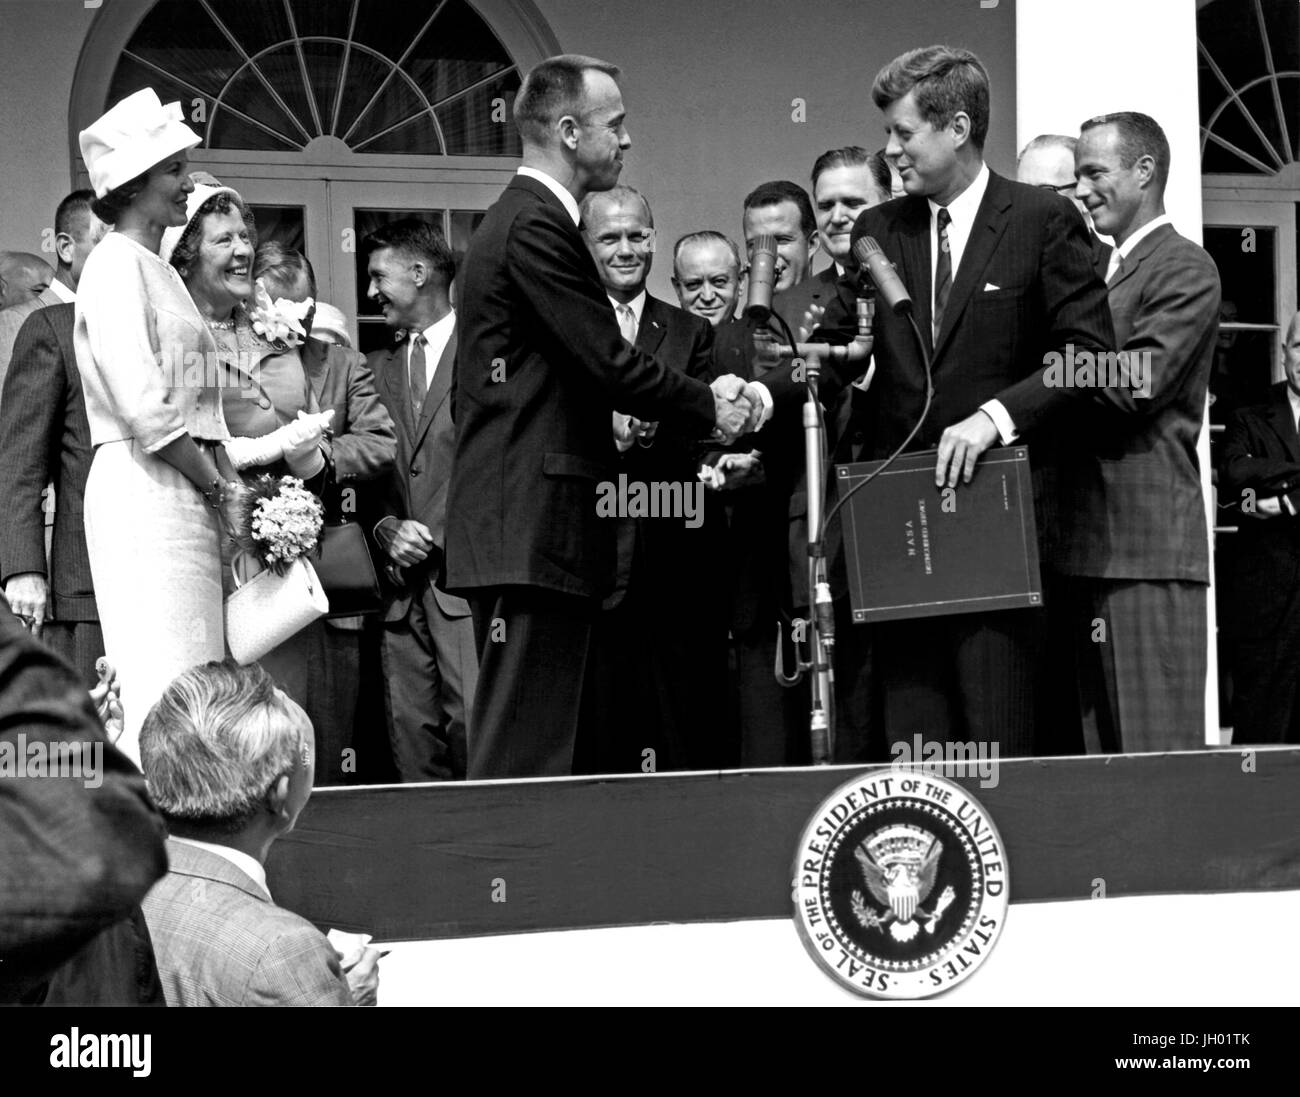 President John F. Kennedy congratulates astronaut Alan B. Shepard, Jr., the first American in space, on his historic May 5th, 1961 ride in the Freedom 7 spacecraft and presents him with the NASA Distinguished Service Award. The ceremony took place on the White House lawn. Shepard's wife, Louise (left in white dress and hat), and his mother were in attendance as well as the other six Mercury astronauts and NASA officals, some visible in the background. Stock Photo